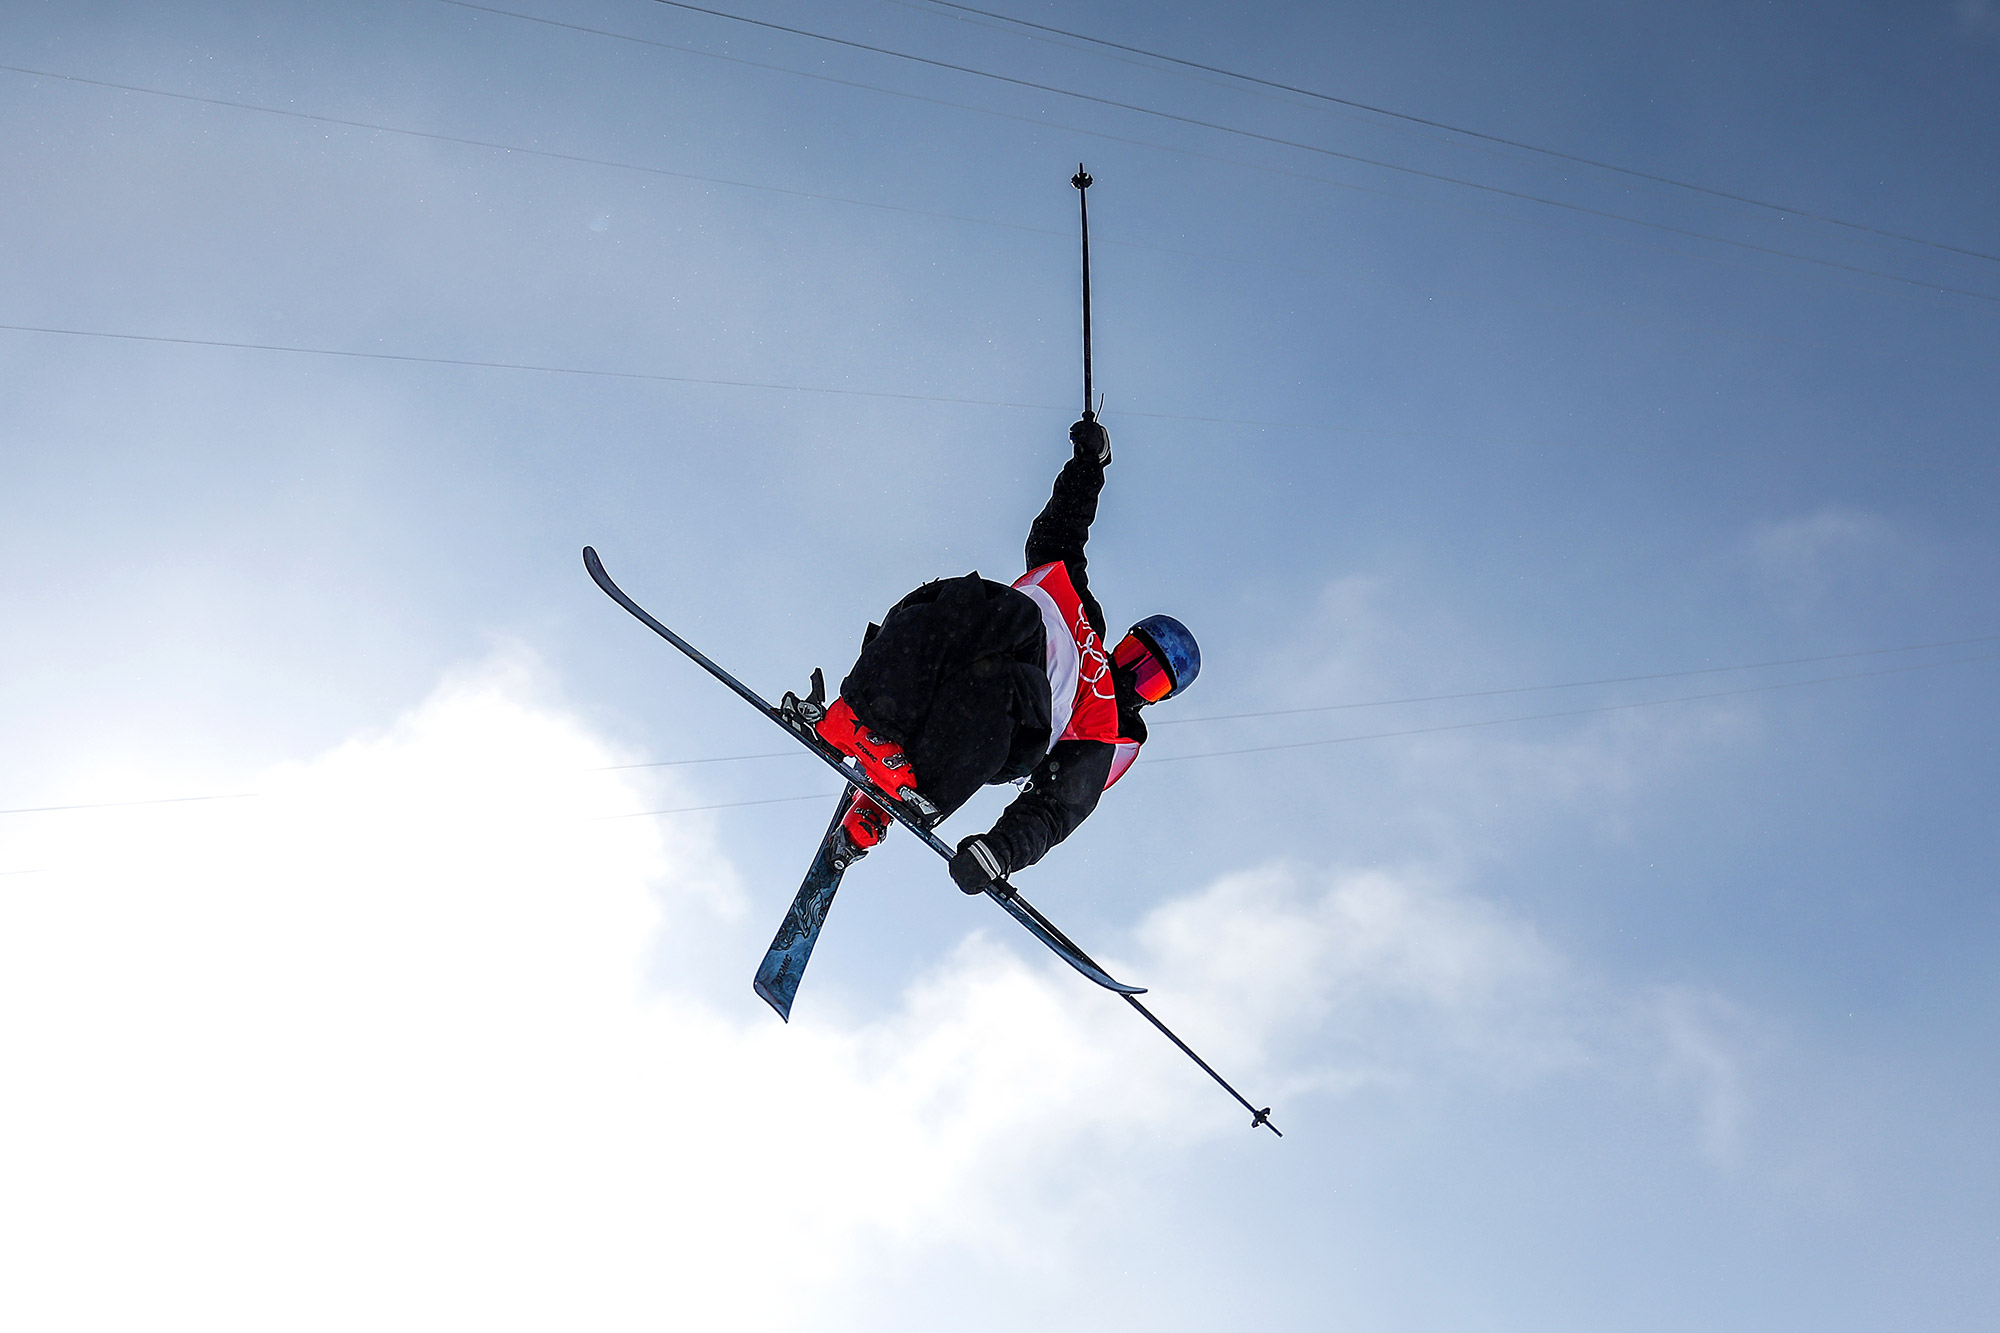 New Zealand's Nico Porteous performs a trick during the freestyle skiing halfpipe final on Saturday.